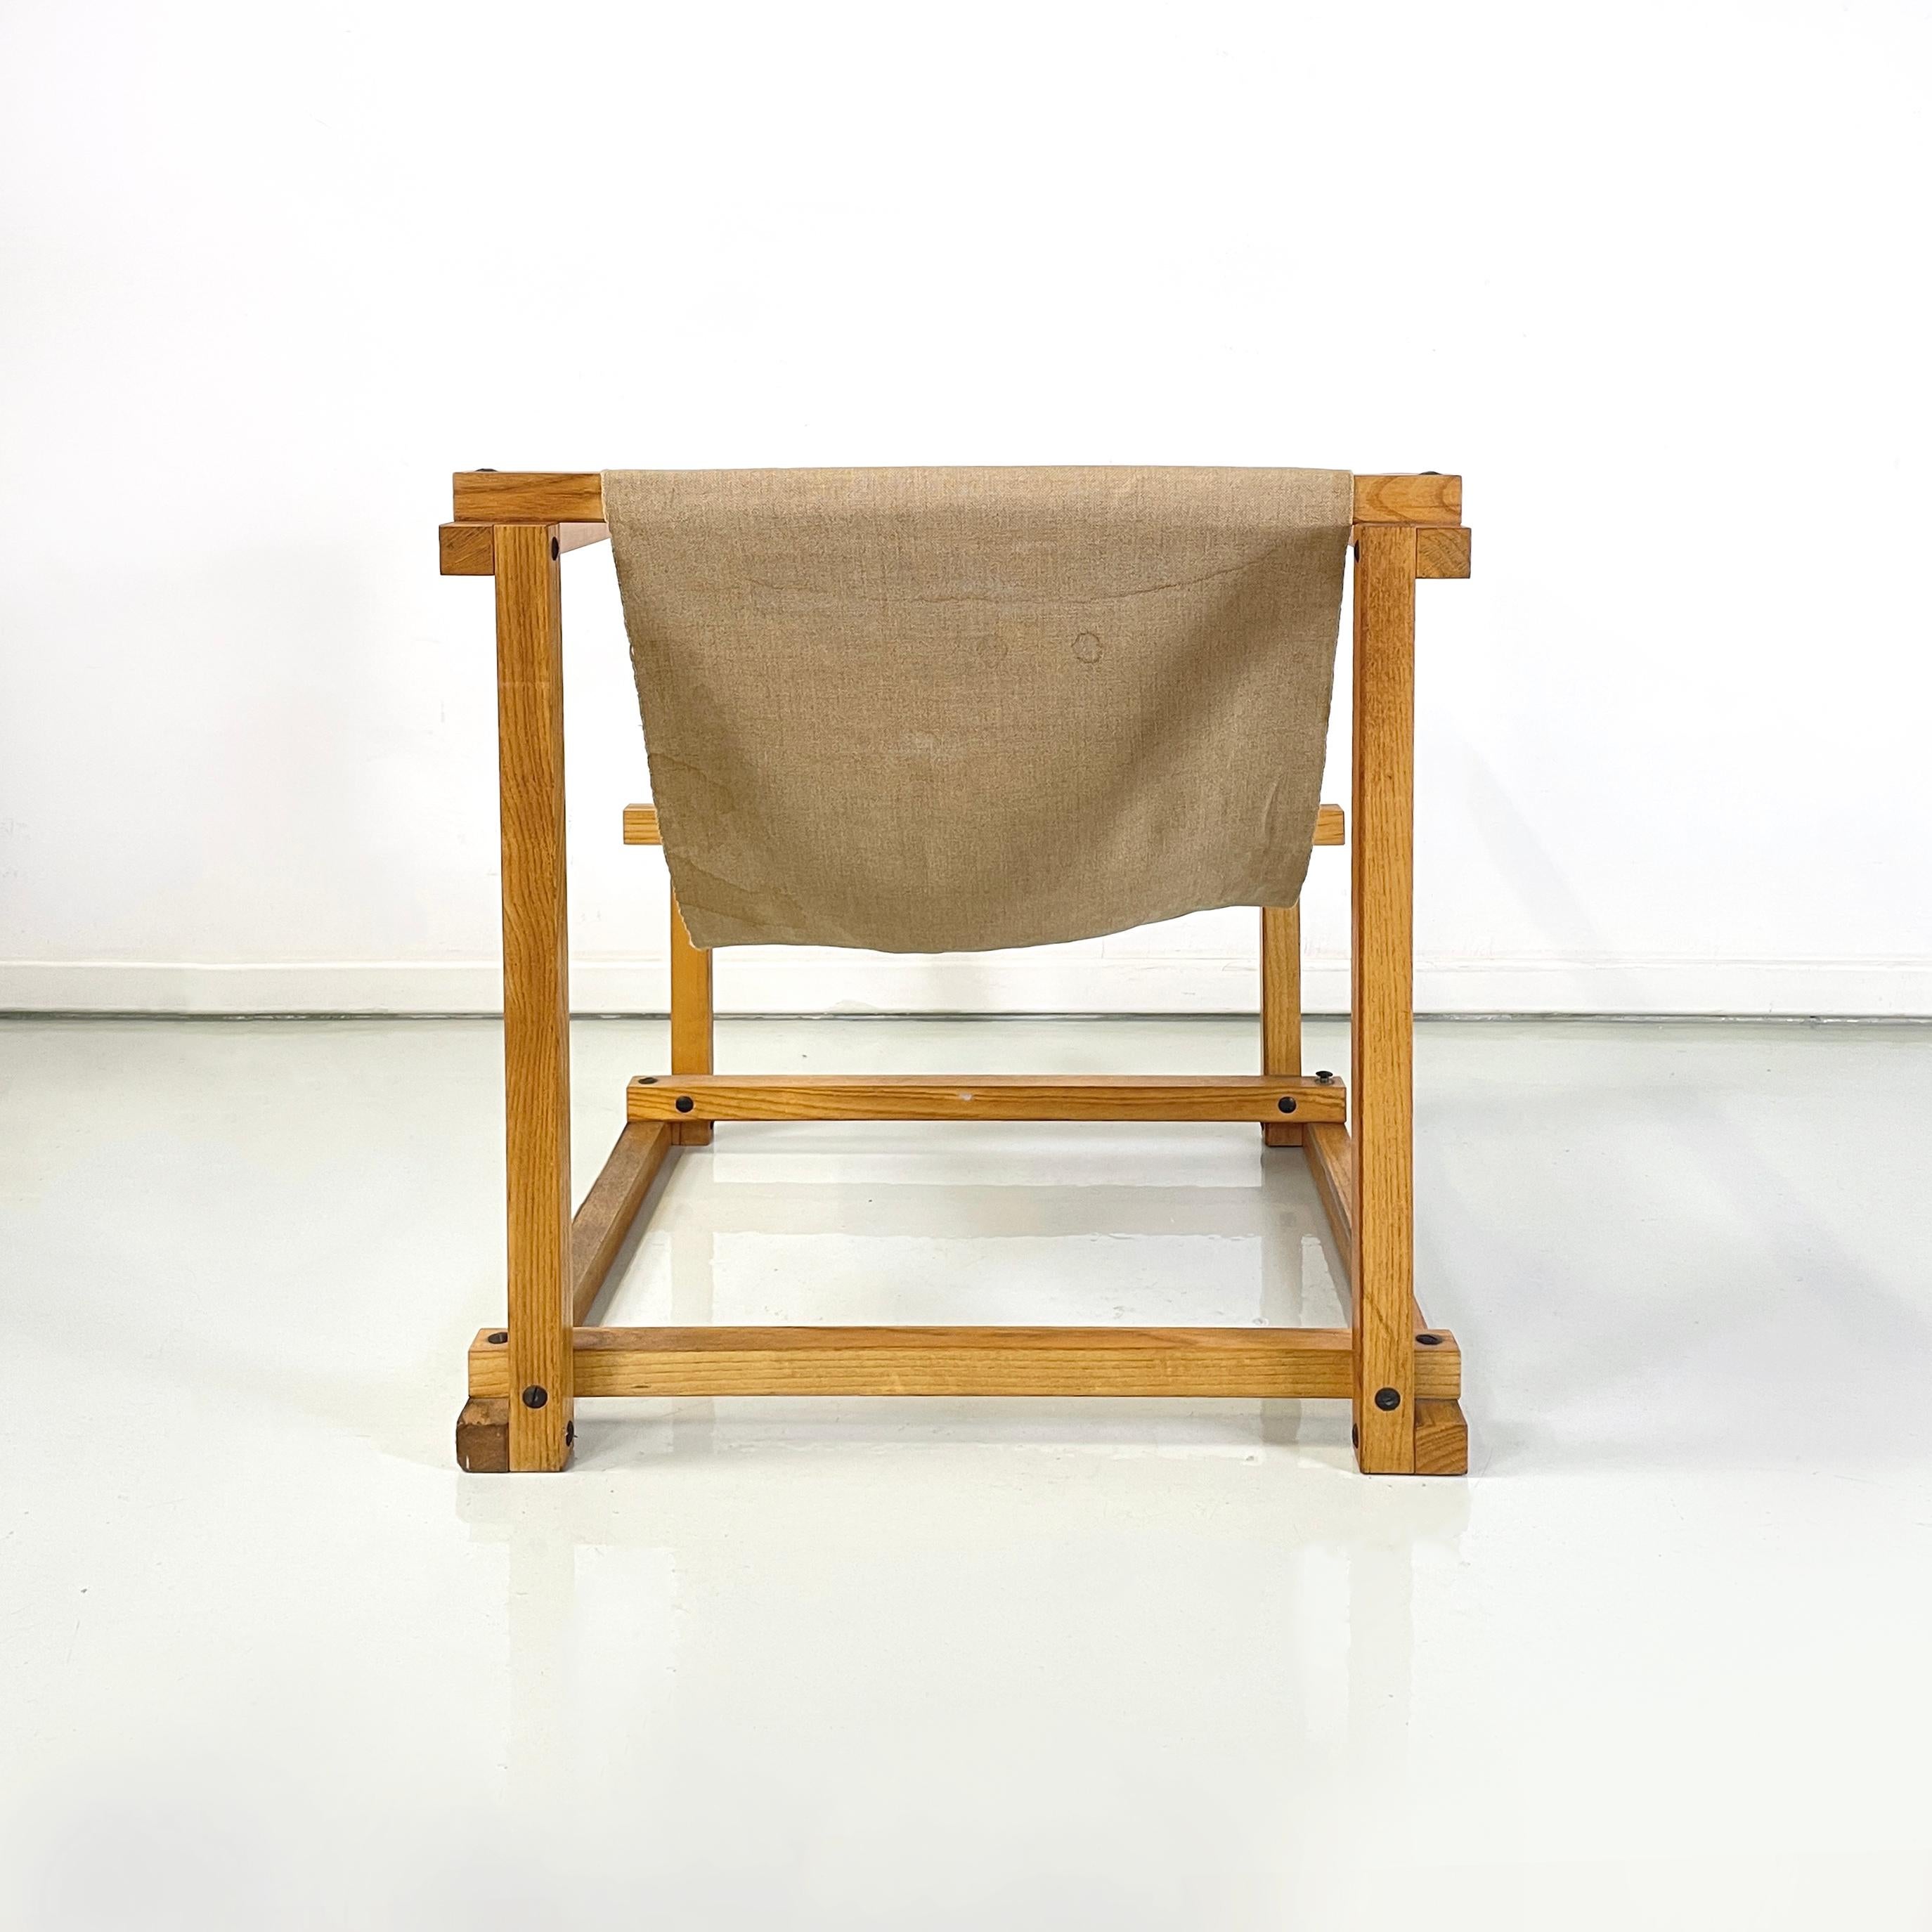 Late 20th Century Italian mid-century modern Wood armchair with beige fabric by Pino Pedano, 1970s For Sale